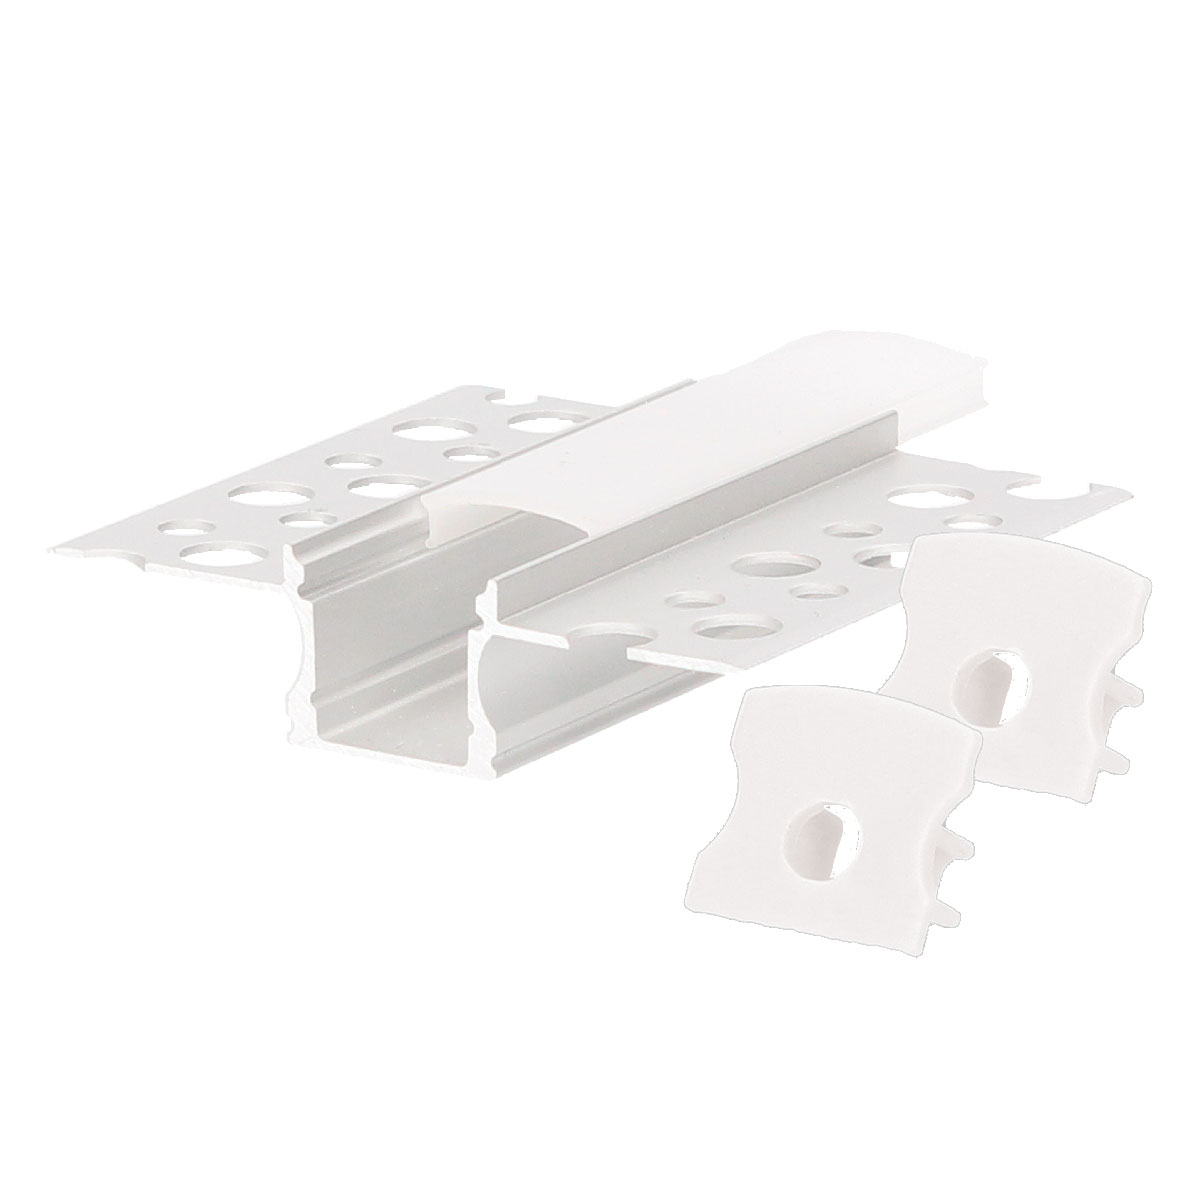 Kit 2M plasterboard recessed aluminum profile for LED strips up to 18mm